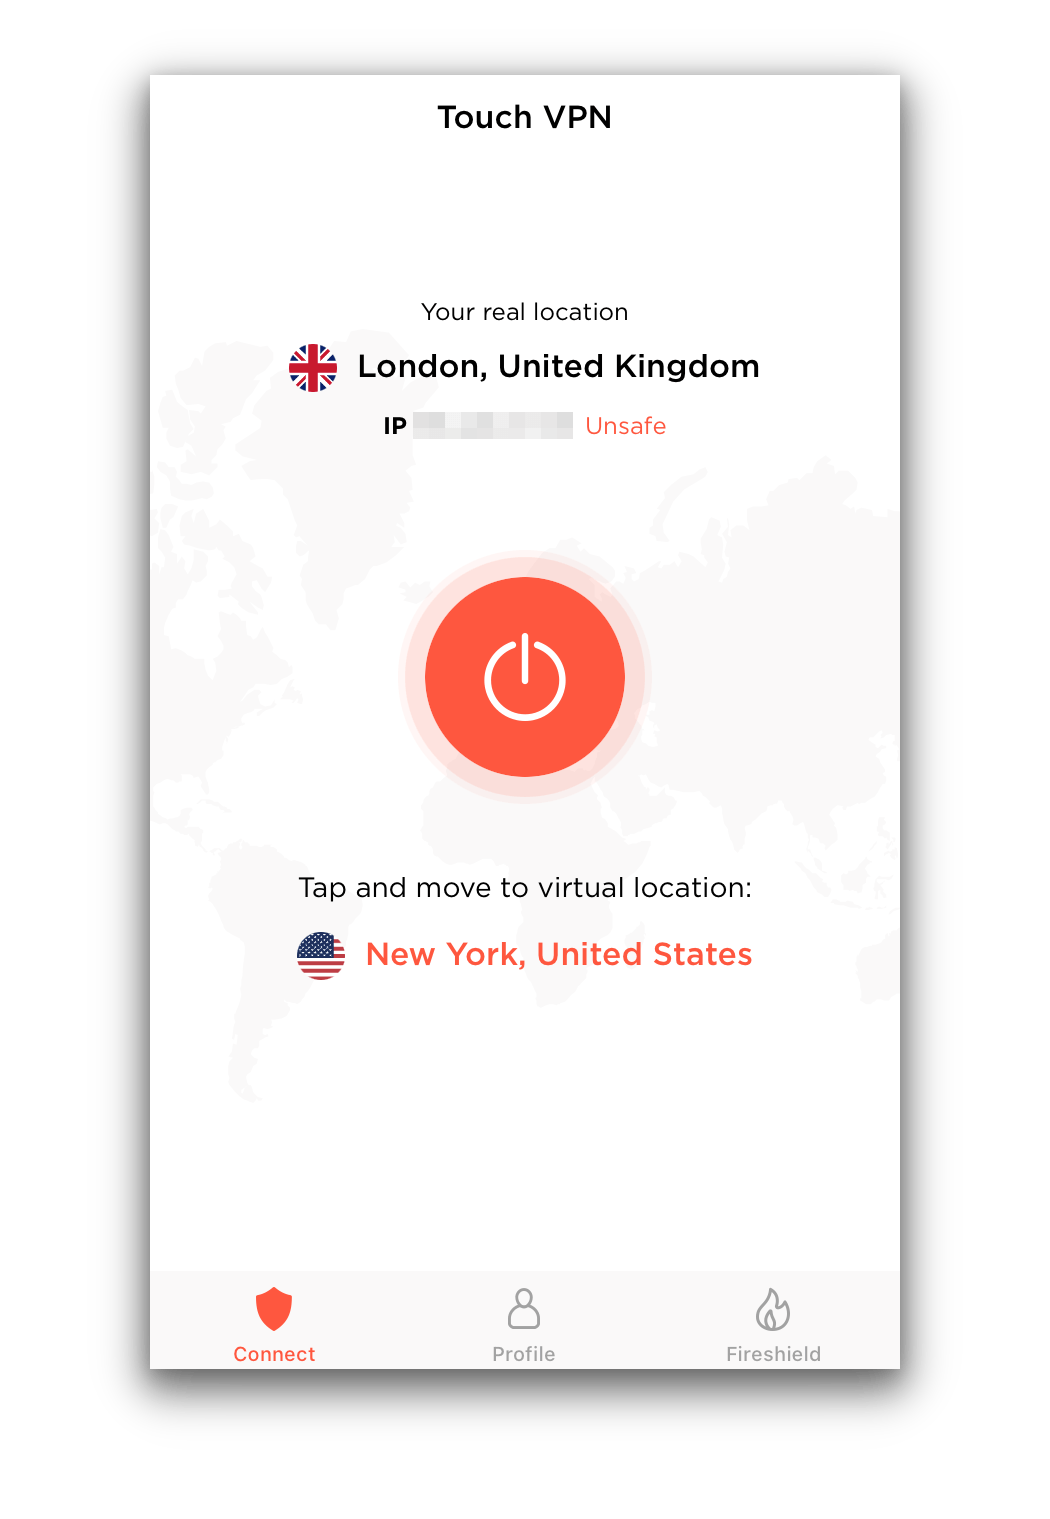 The main menu for Touch VPN's iOS app